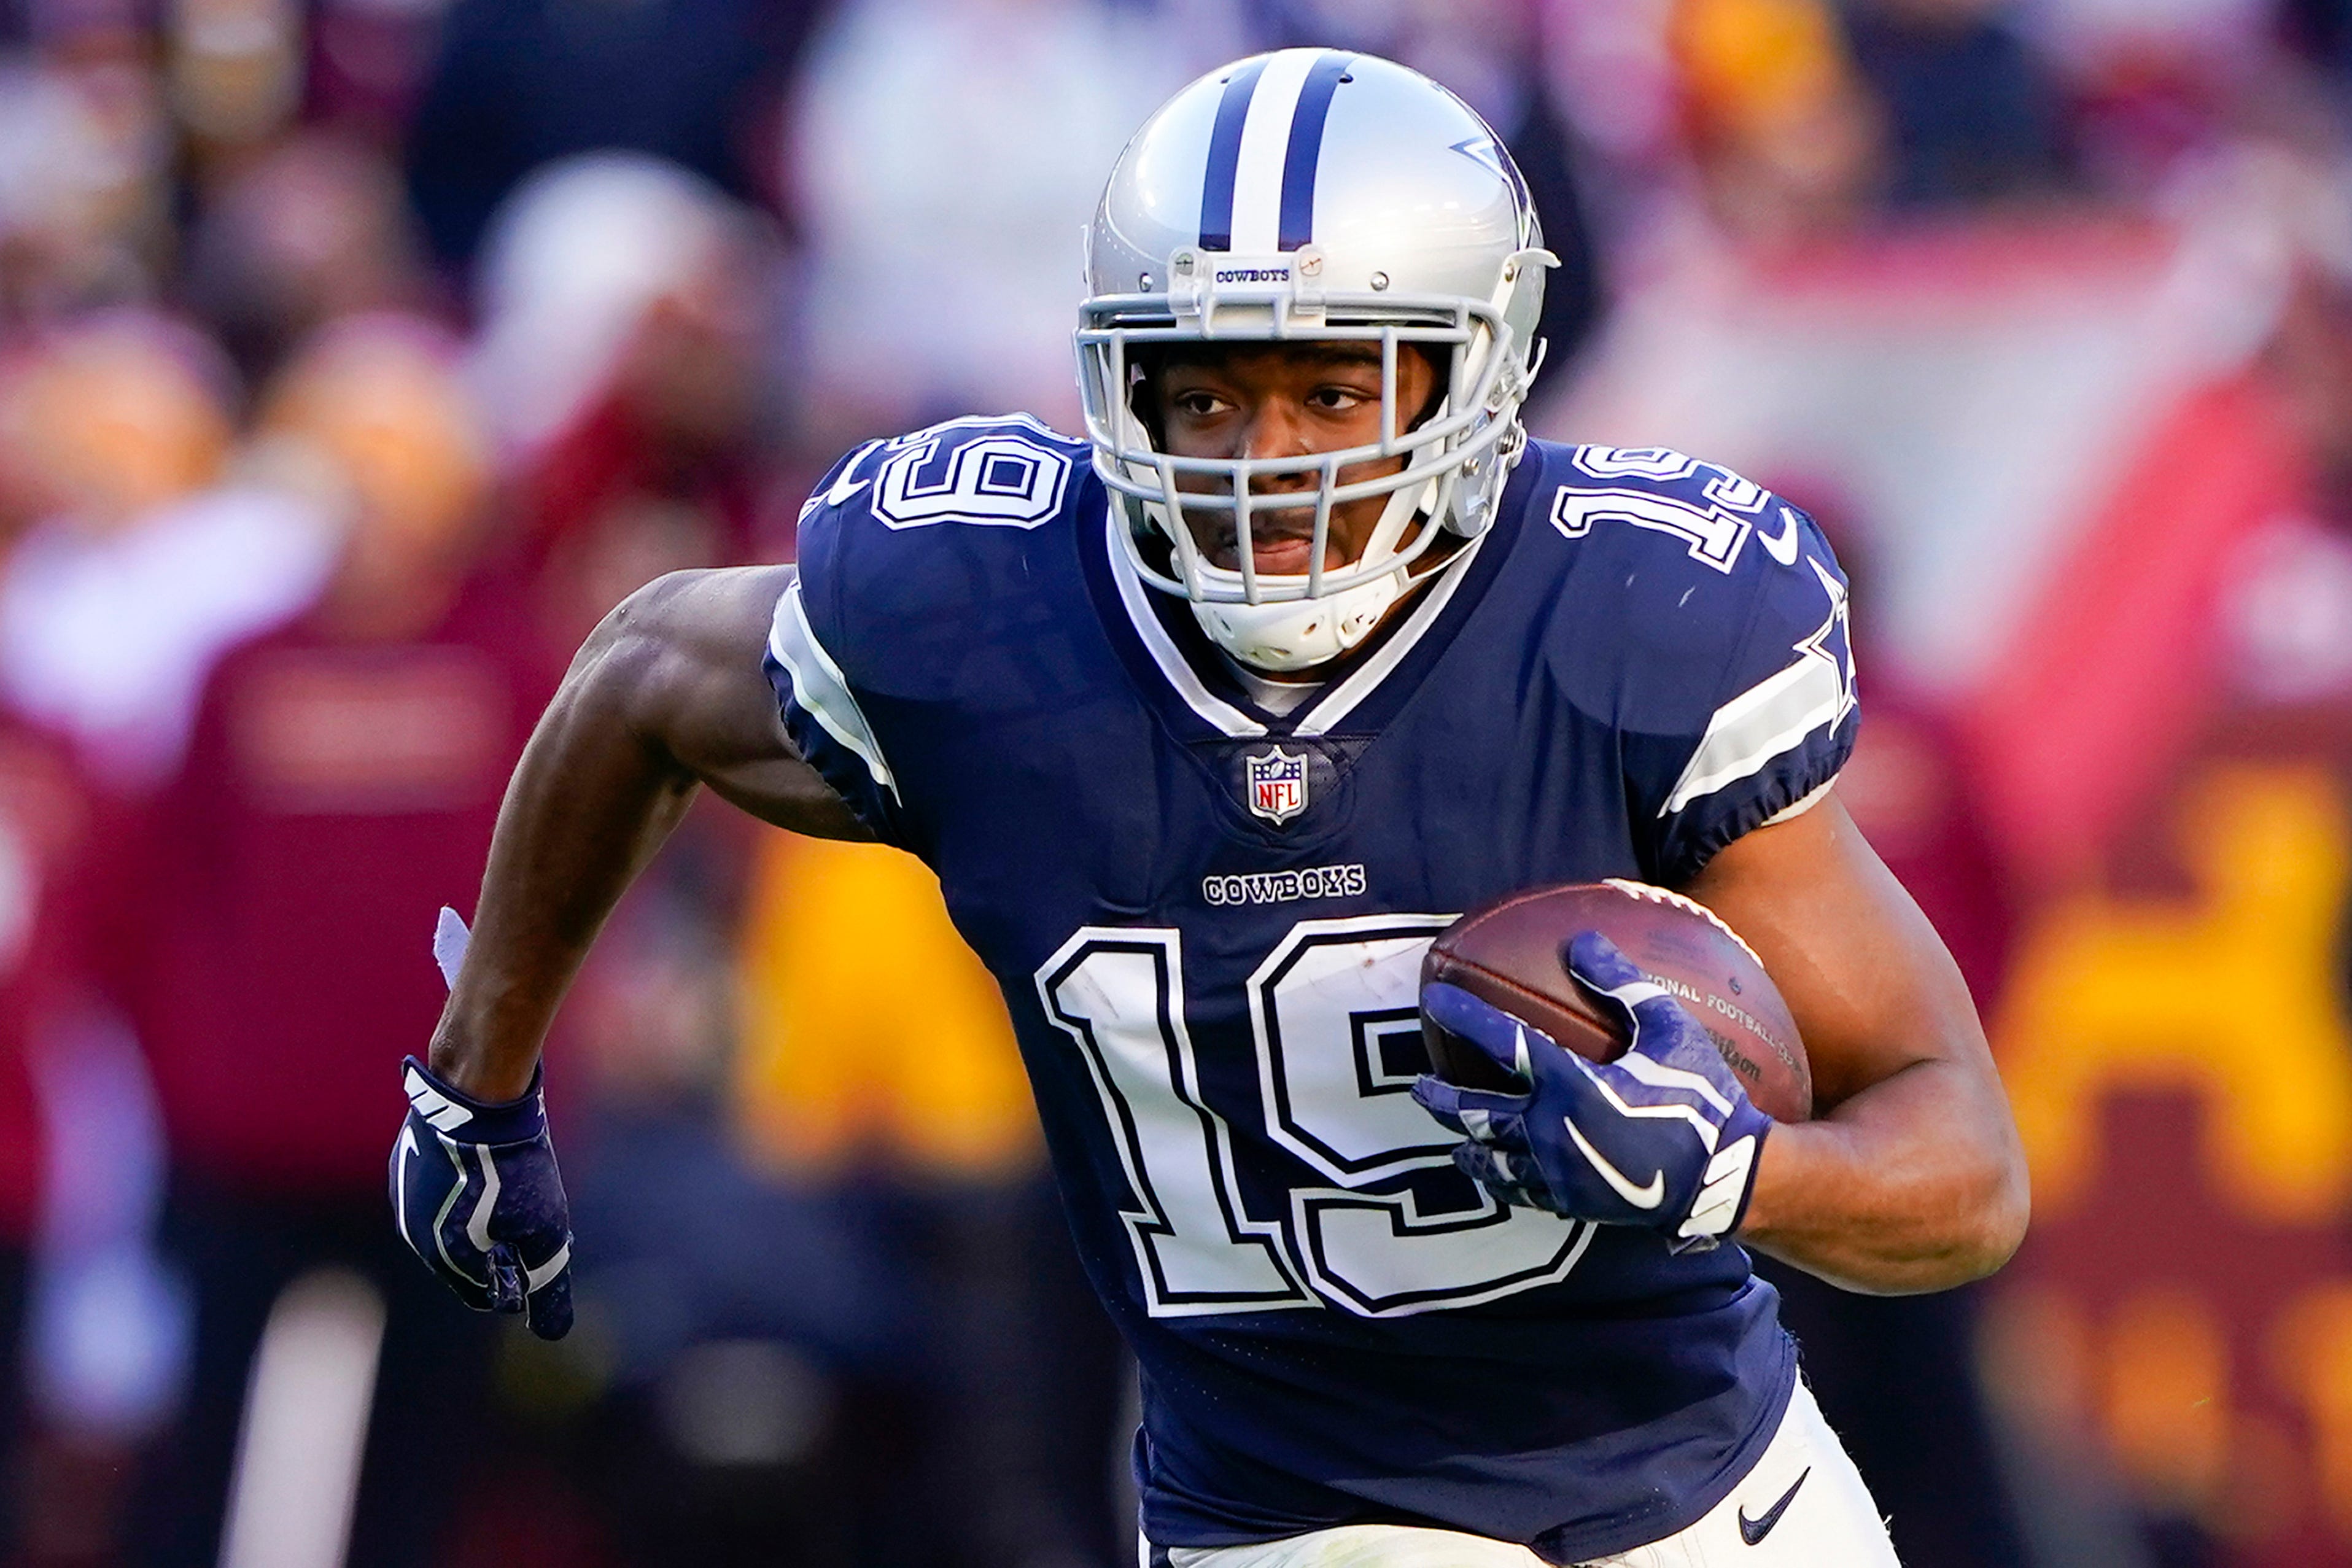 WR Amari Cooper: Traded to Browns (previous team: Cowboys)